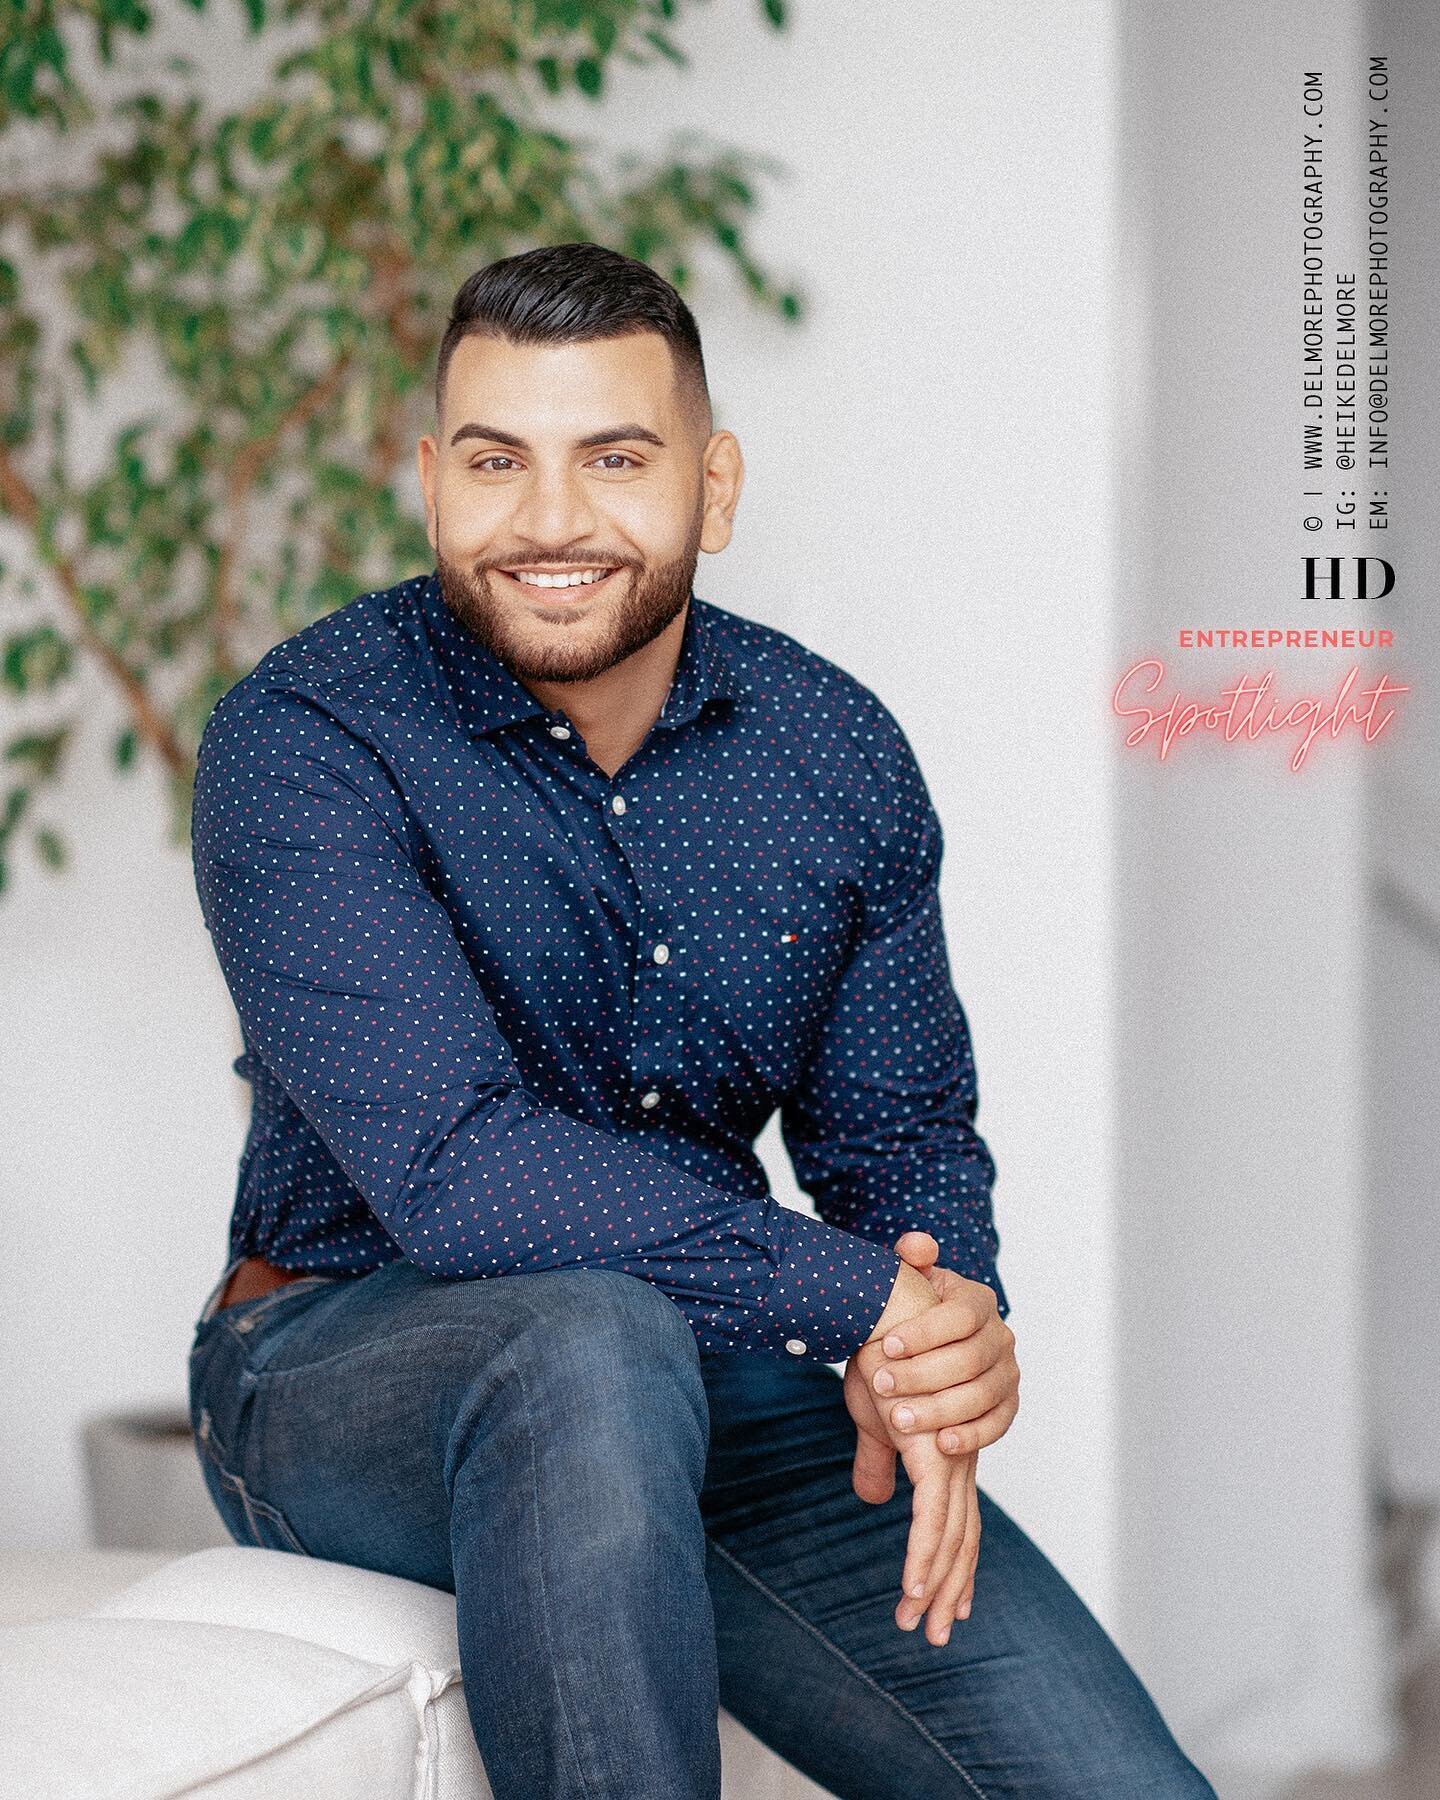 Entrepreneur Spotlight Series⁠⁠
{ Let's support one another }⁠⁠
.⁠⁠
Introducing Abe Kobrosli Mortgage Specialist. @abe_kobrosli.rbc⁠⁠
⁠⁠
Q. Why did you start your business?⁠⁠
A.  I wanted to give honest and meaningful advice and I wanted to make a di